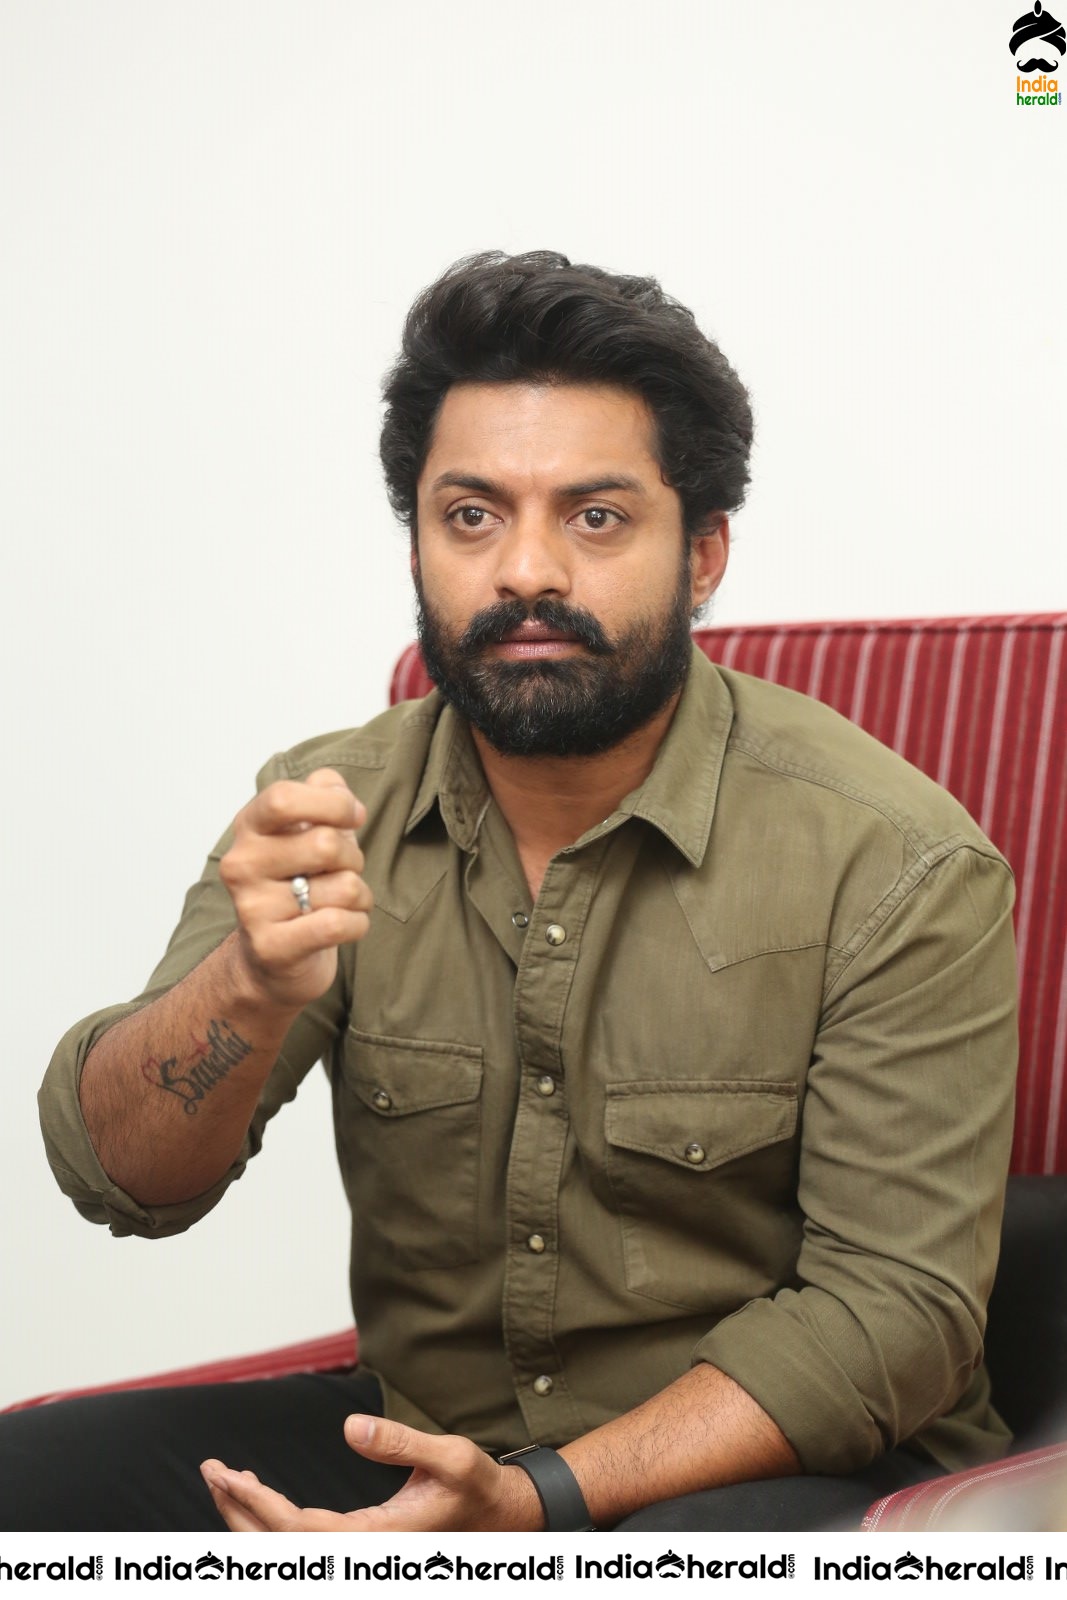 Actor Nandamuri Kalyanram shows various expressions in his face during a media interaction